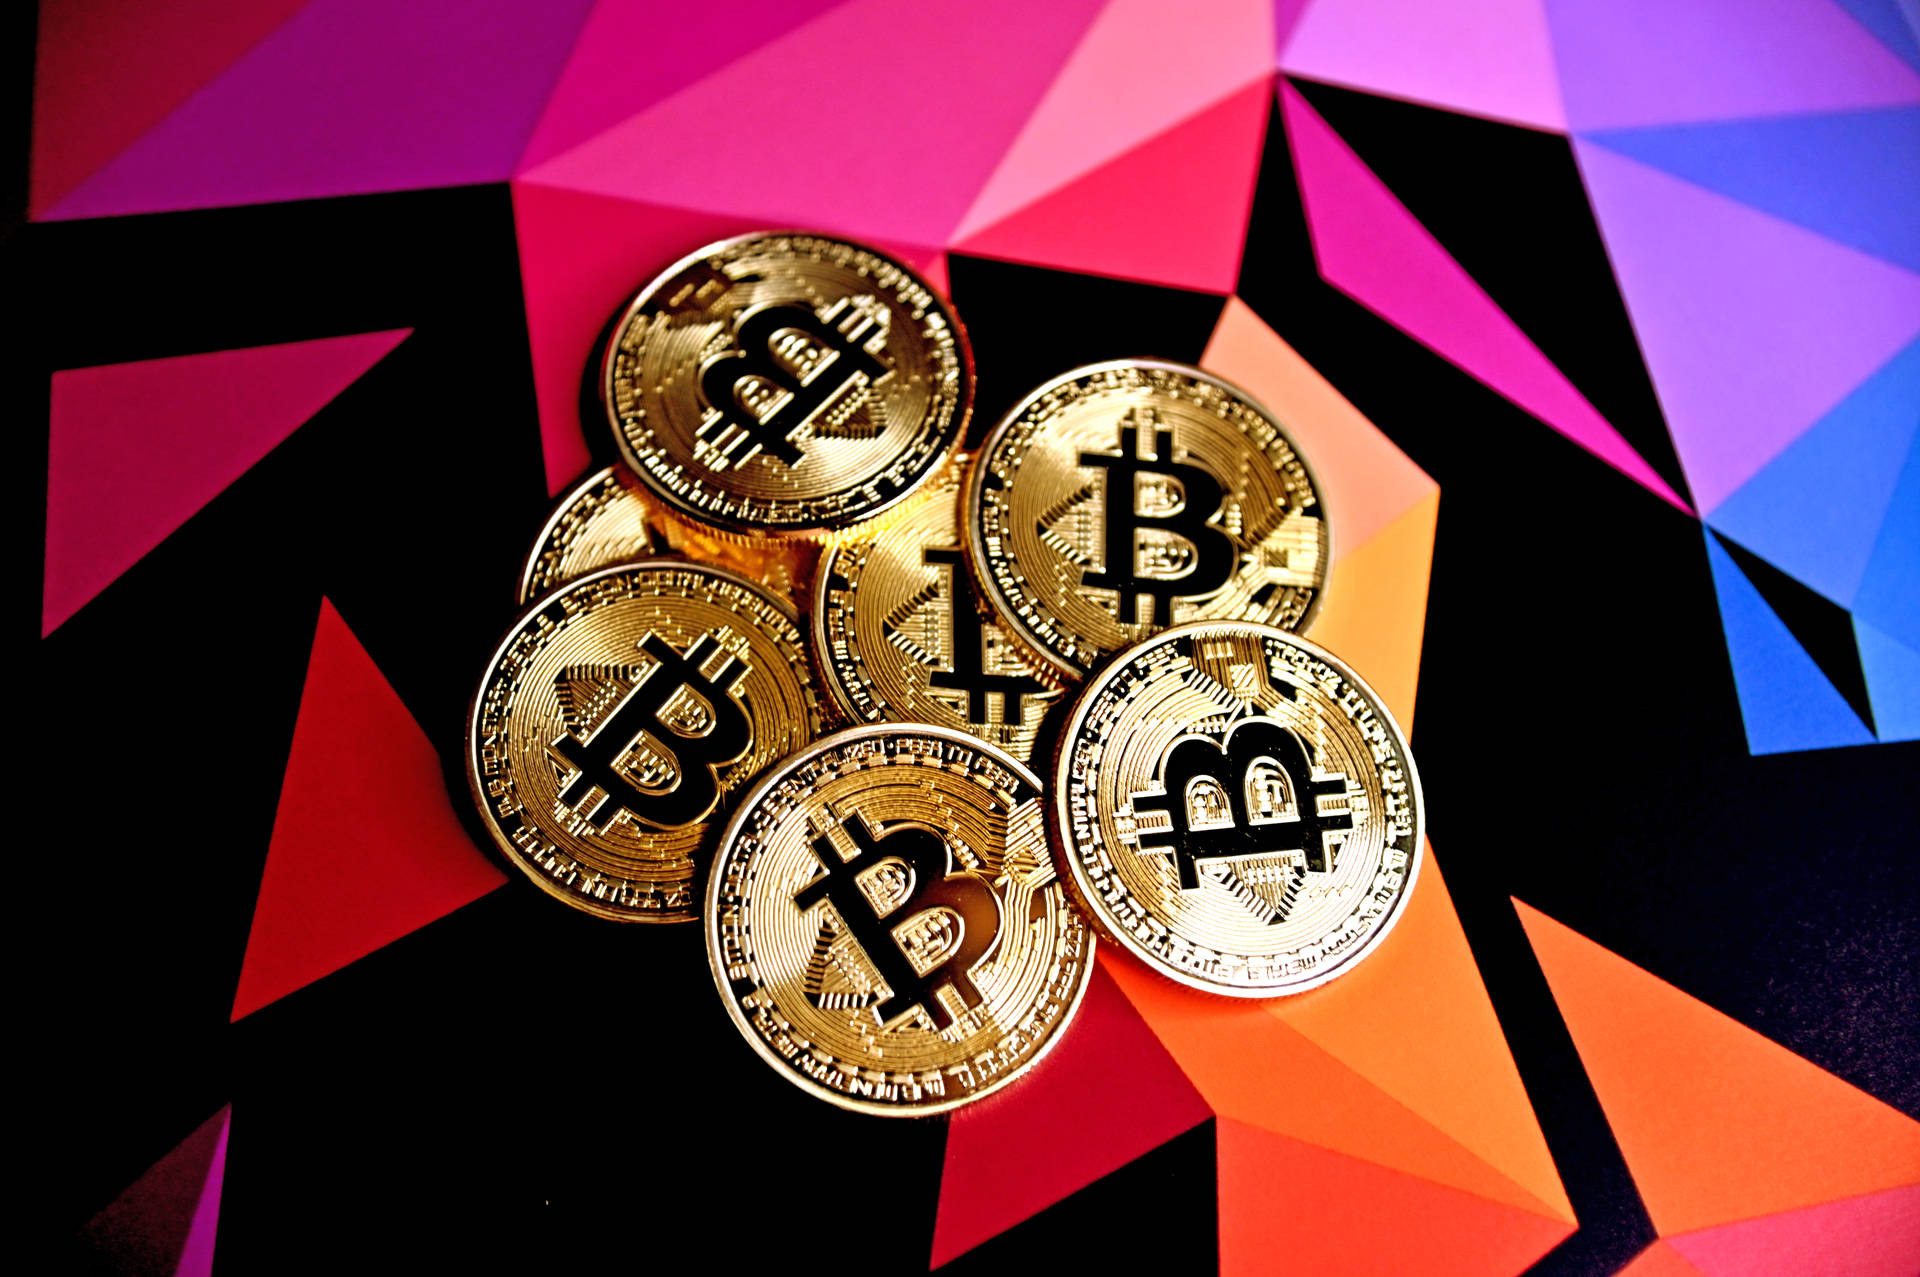 Colorful Geometric Art Bitcoins Picture